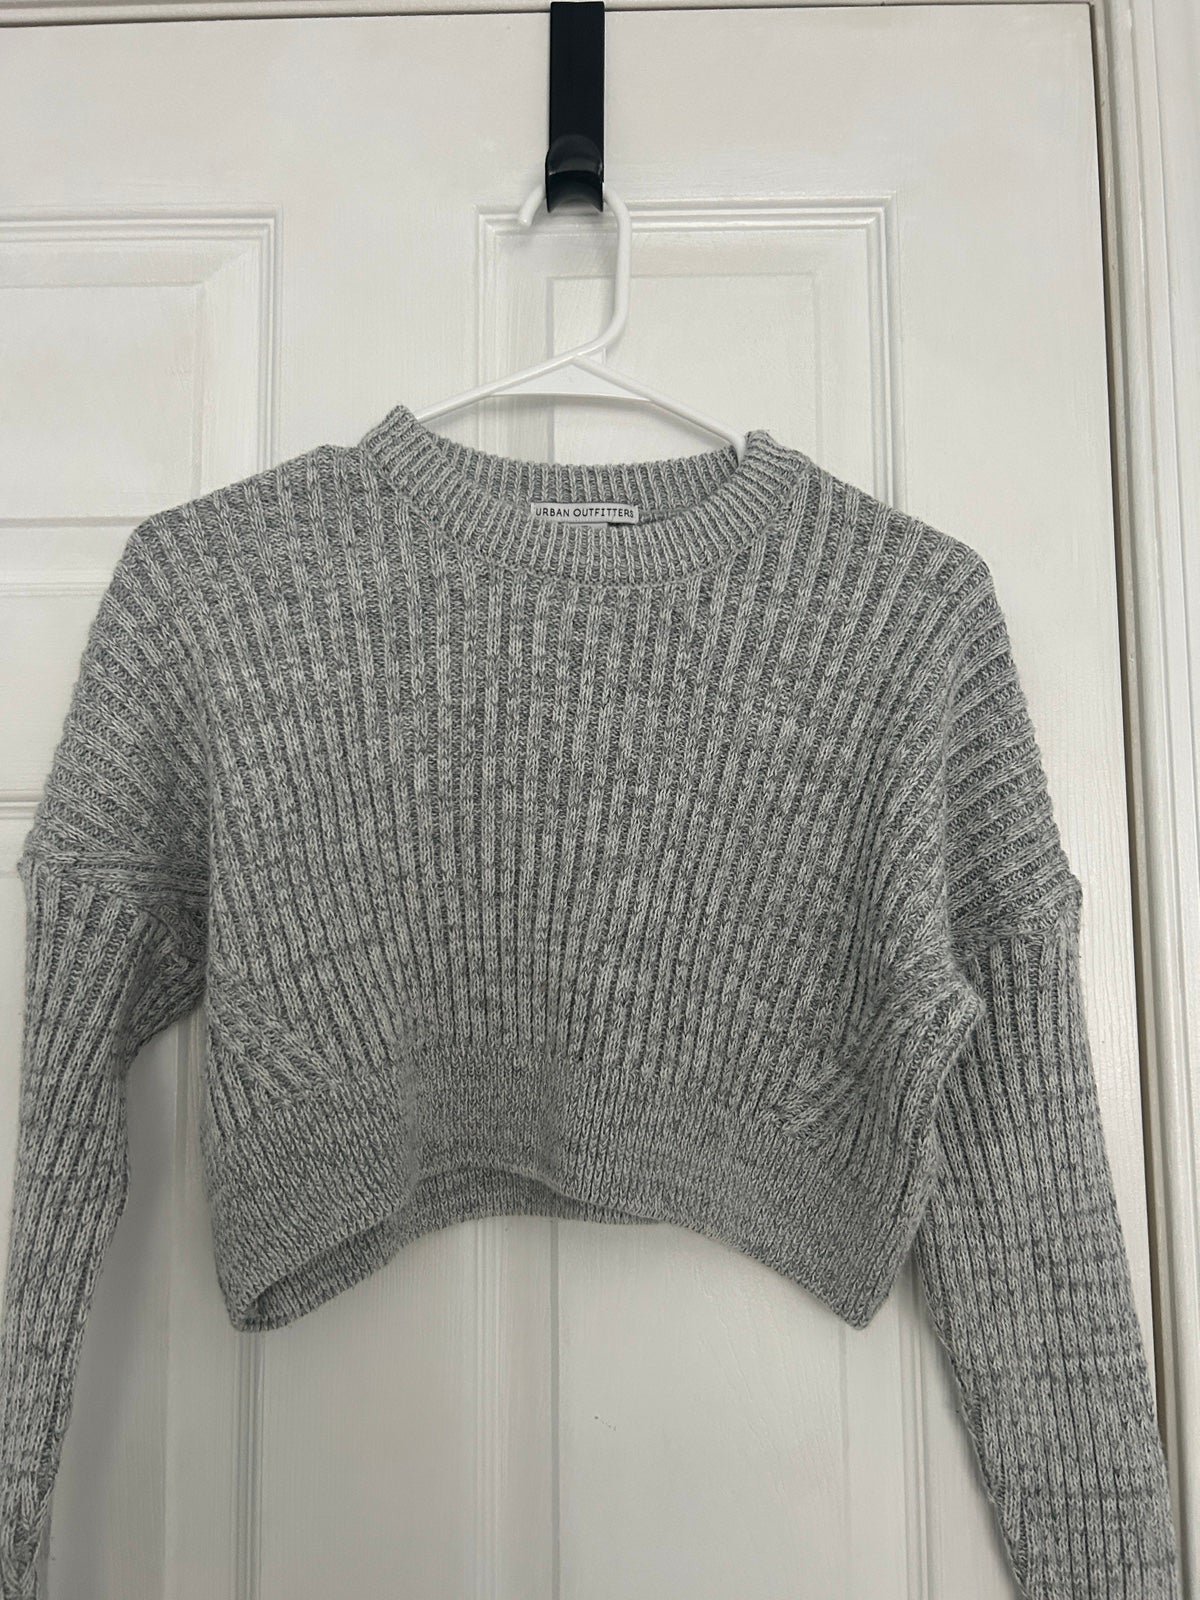 Discounted Urban Outfitters Cropped Sweater lBNTDlrKl f